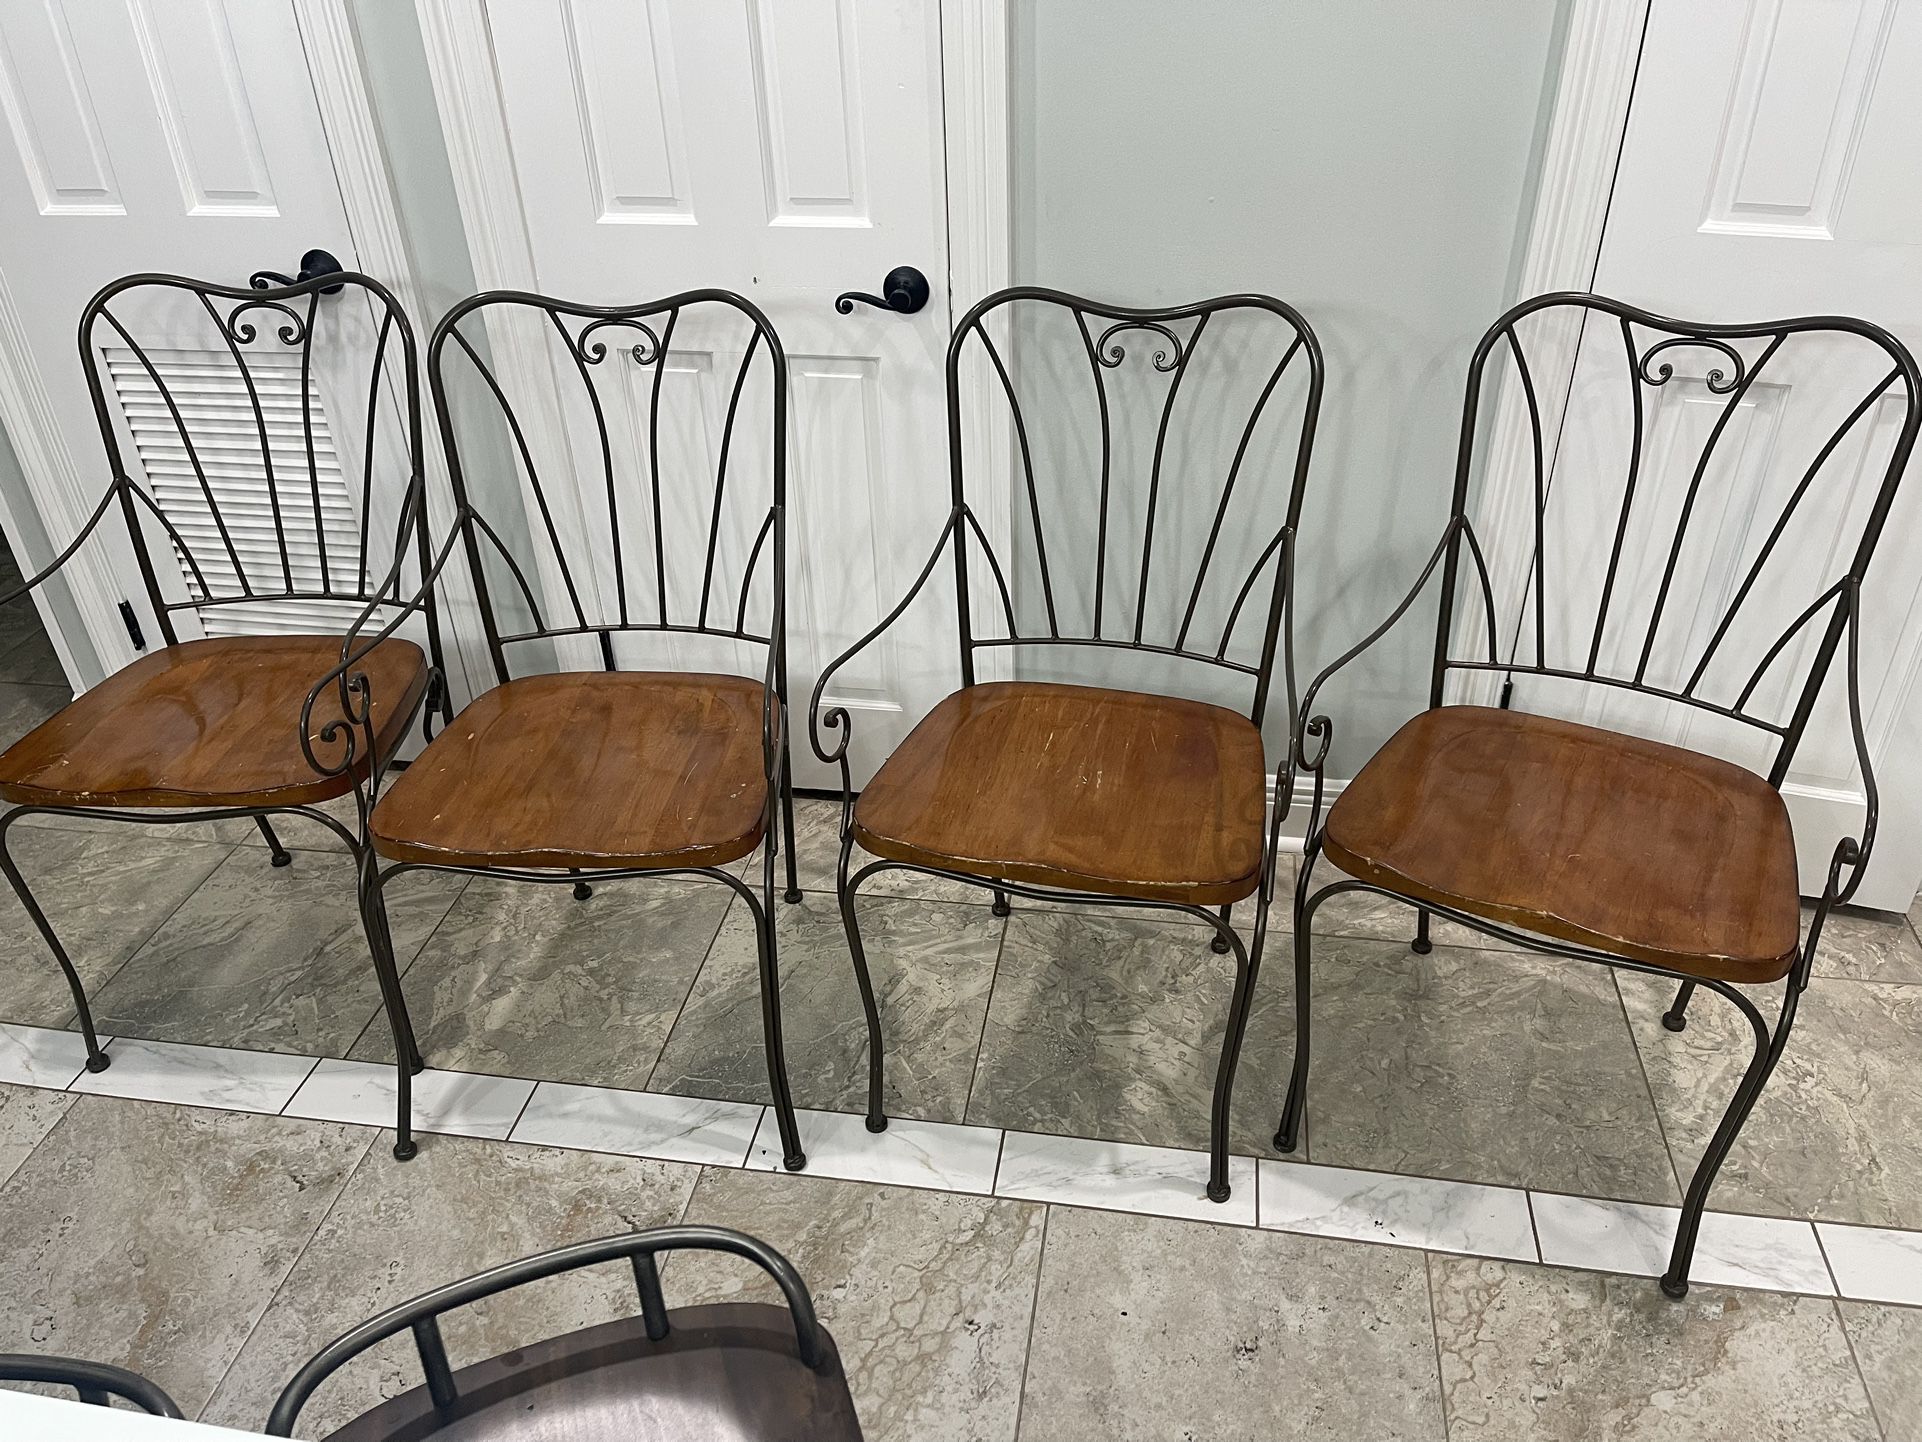 4 sturdy wood , heavy and solid metal Dinnig chairs in good condition one is super heavy